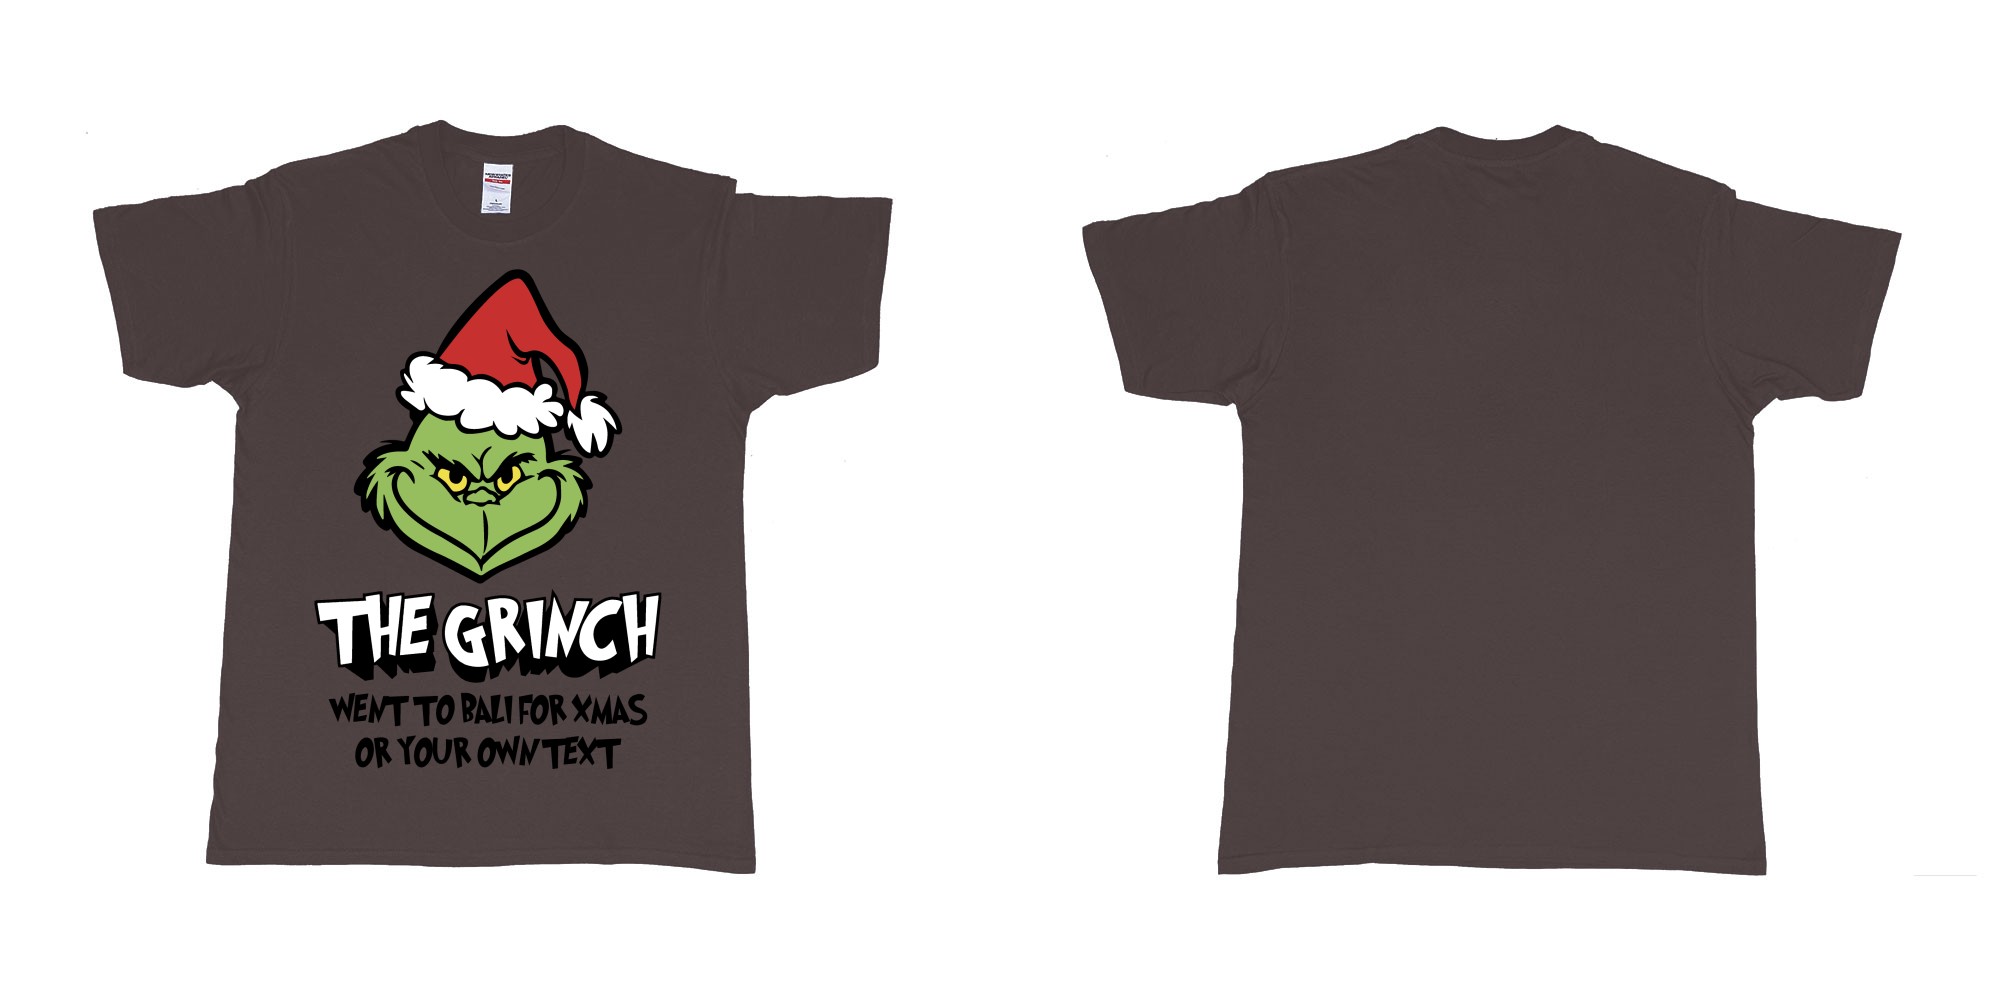 Custom tshirt design the grinch went to bali for xmas tshirt in fabric color dark-chocolate choice your own text made in Bali by The Pirate Way